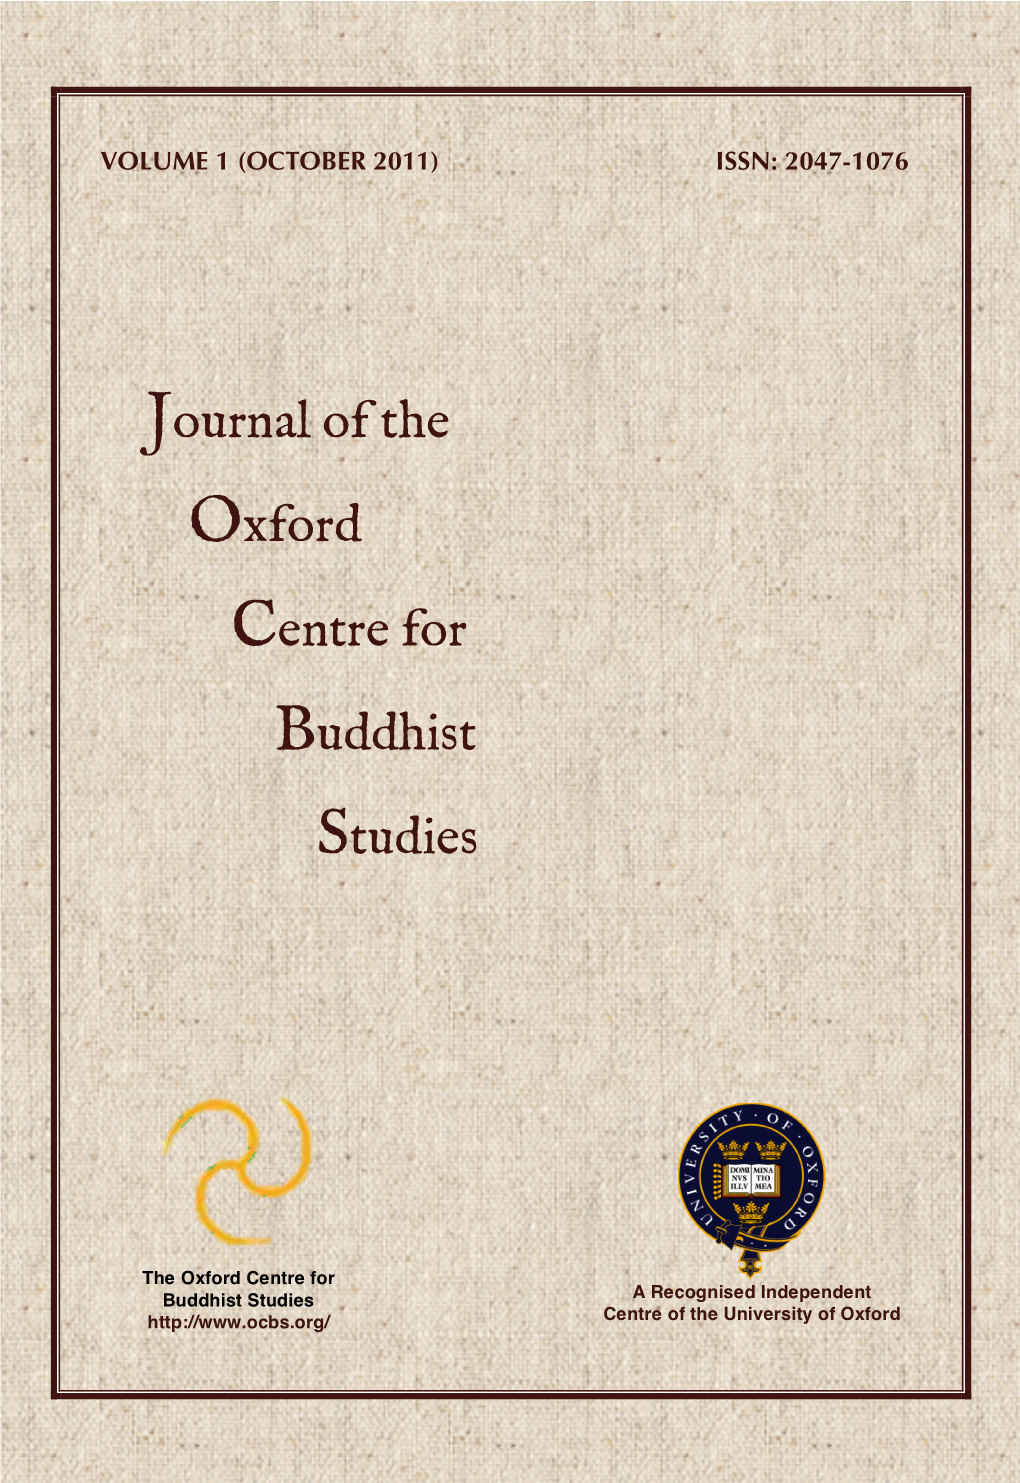 Journal of the Oxford Centre for Buddhist Studies, Vol. 1, October